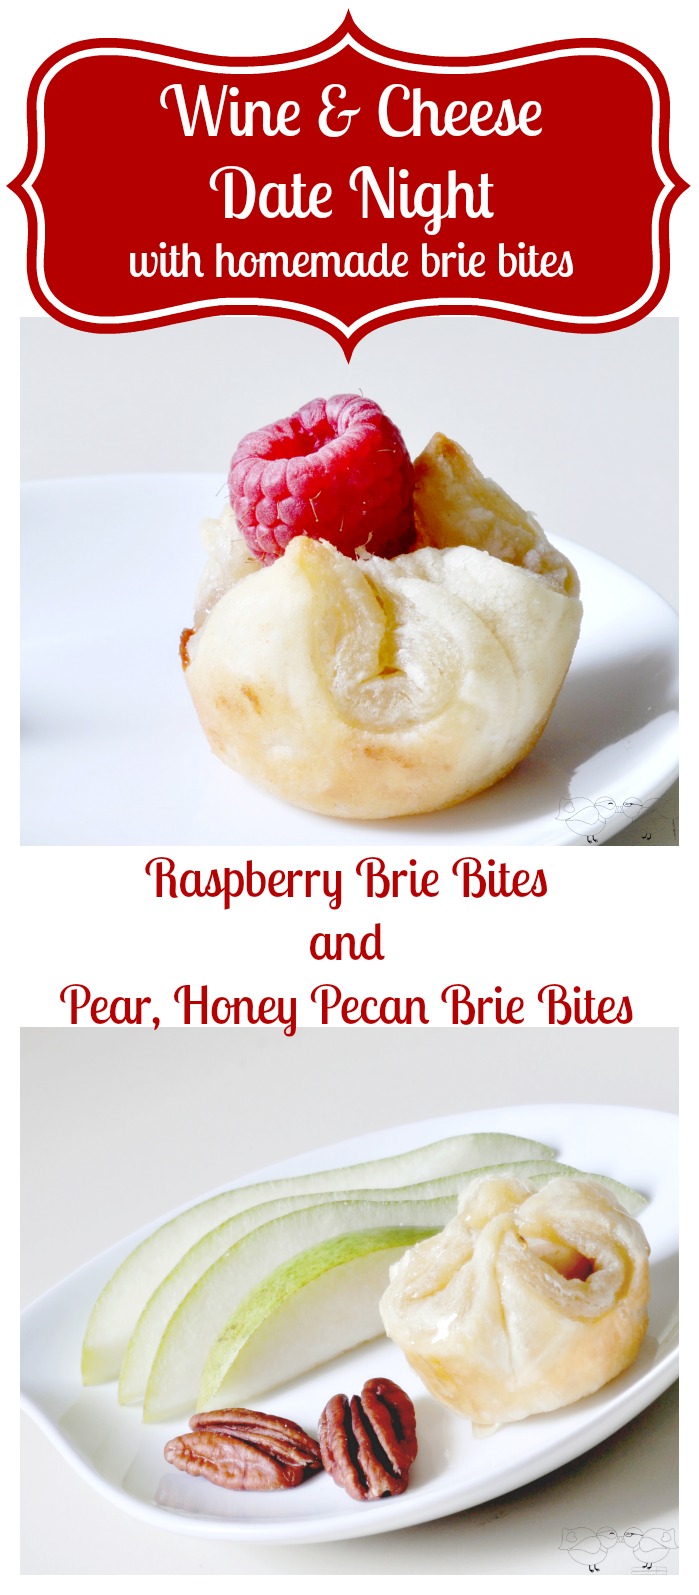 Wine and Cheese Date Night with Homemade Brie Bites - Raspberry Brie Bites and Pear, Honey Pecan Brie Bites {The Love Nerds} #datenight #appetizer #puffpastry 